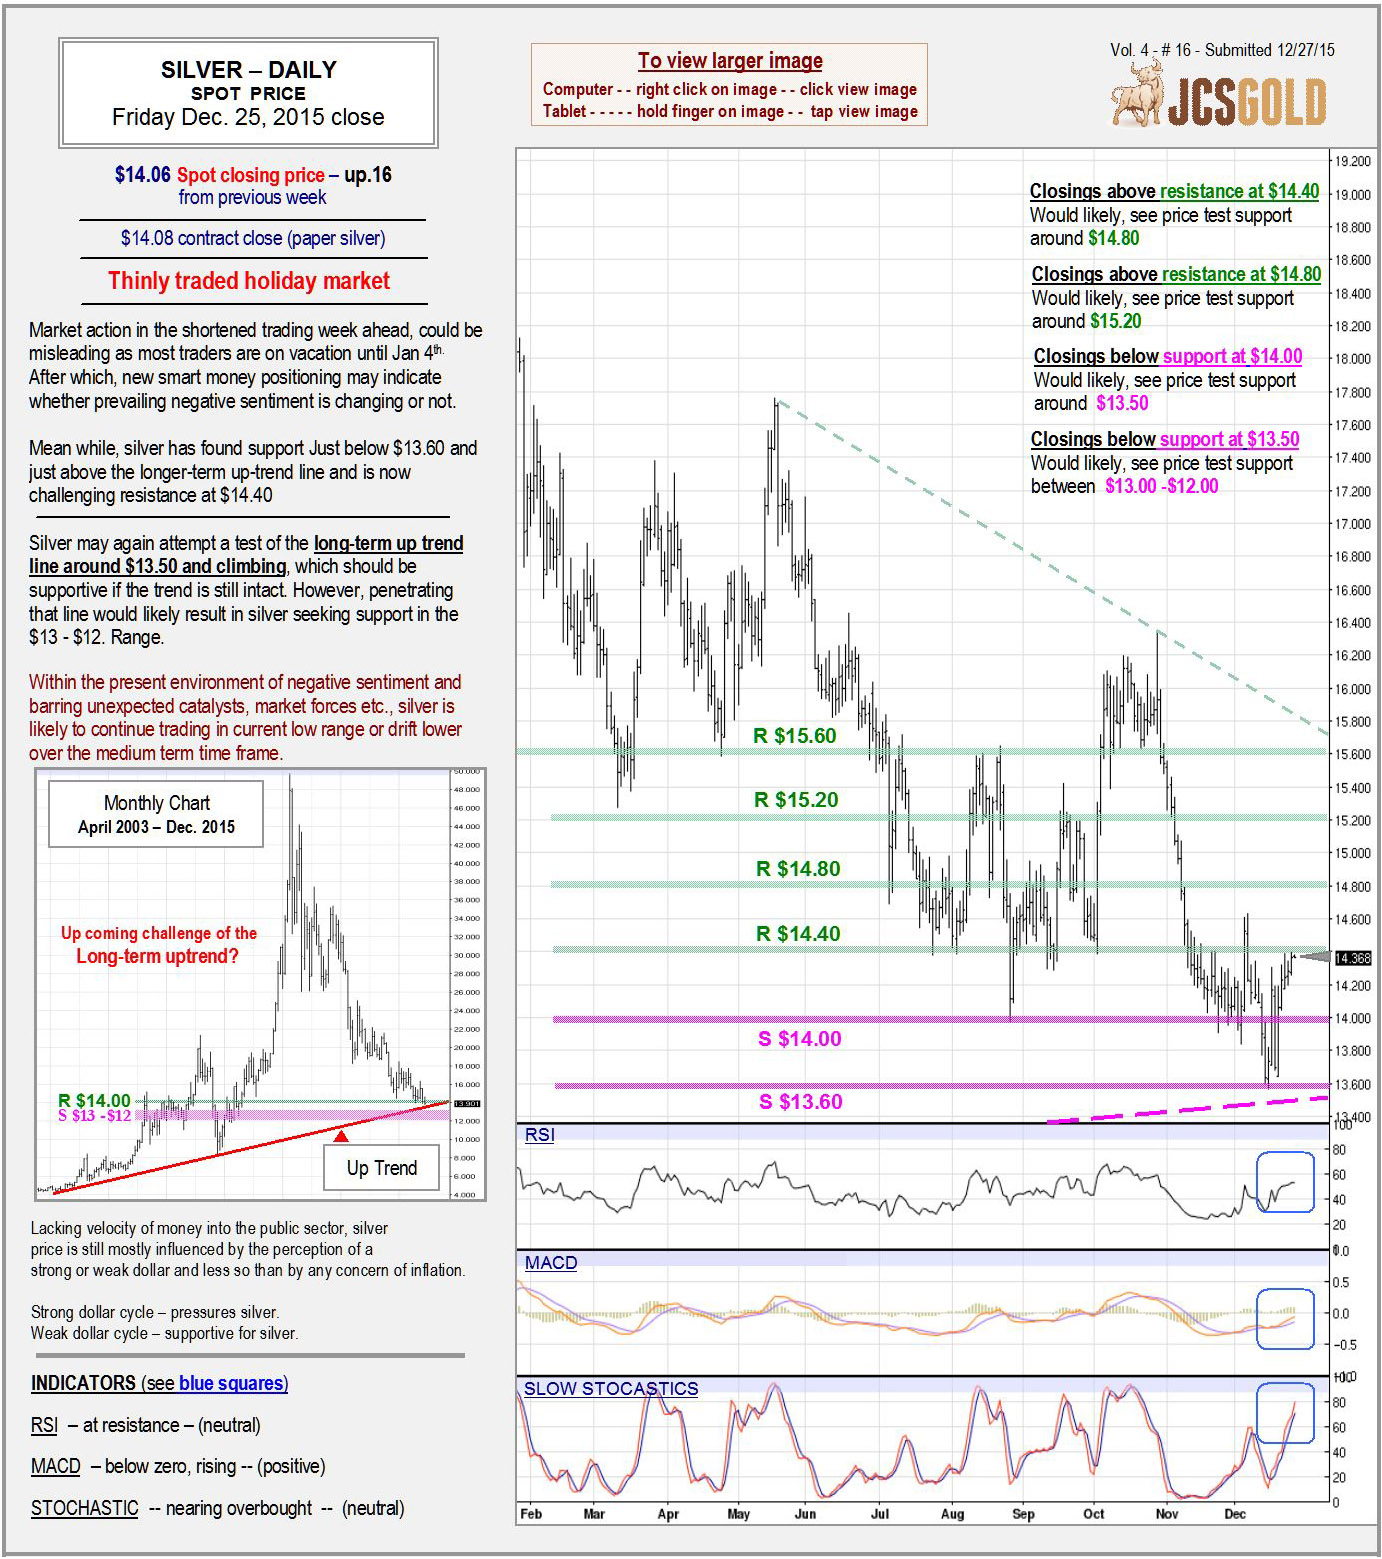 Dec 25, 2015 chart & commentary